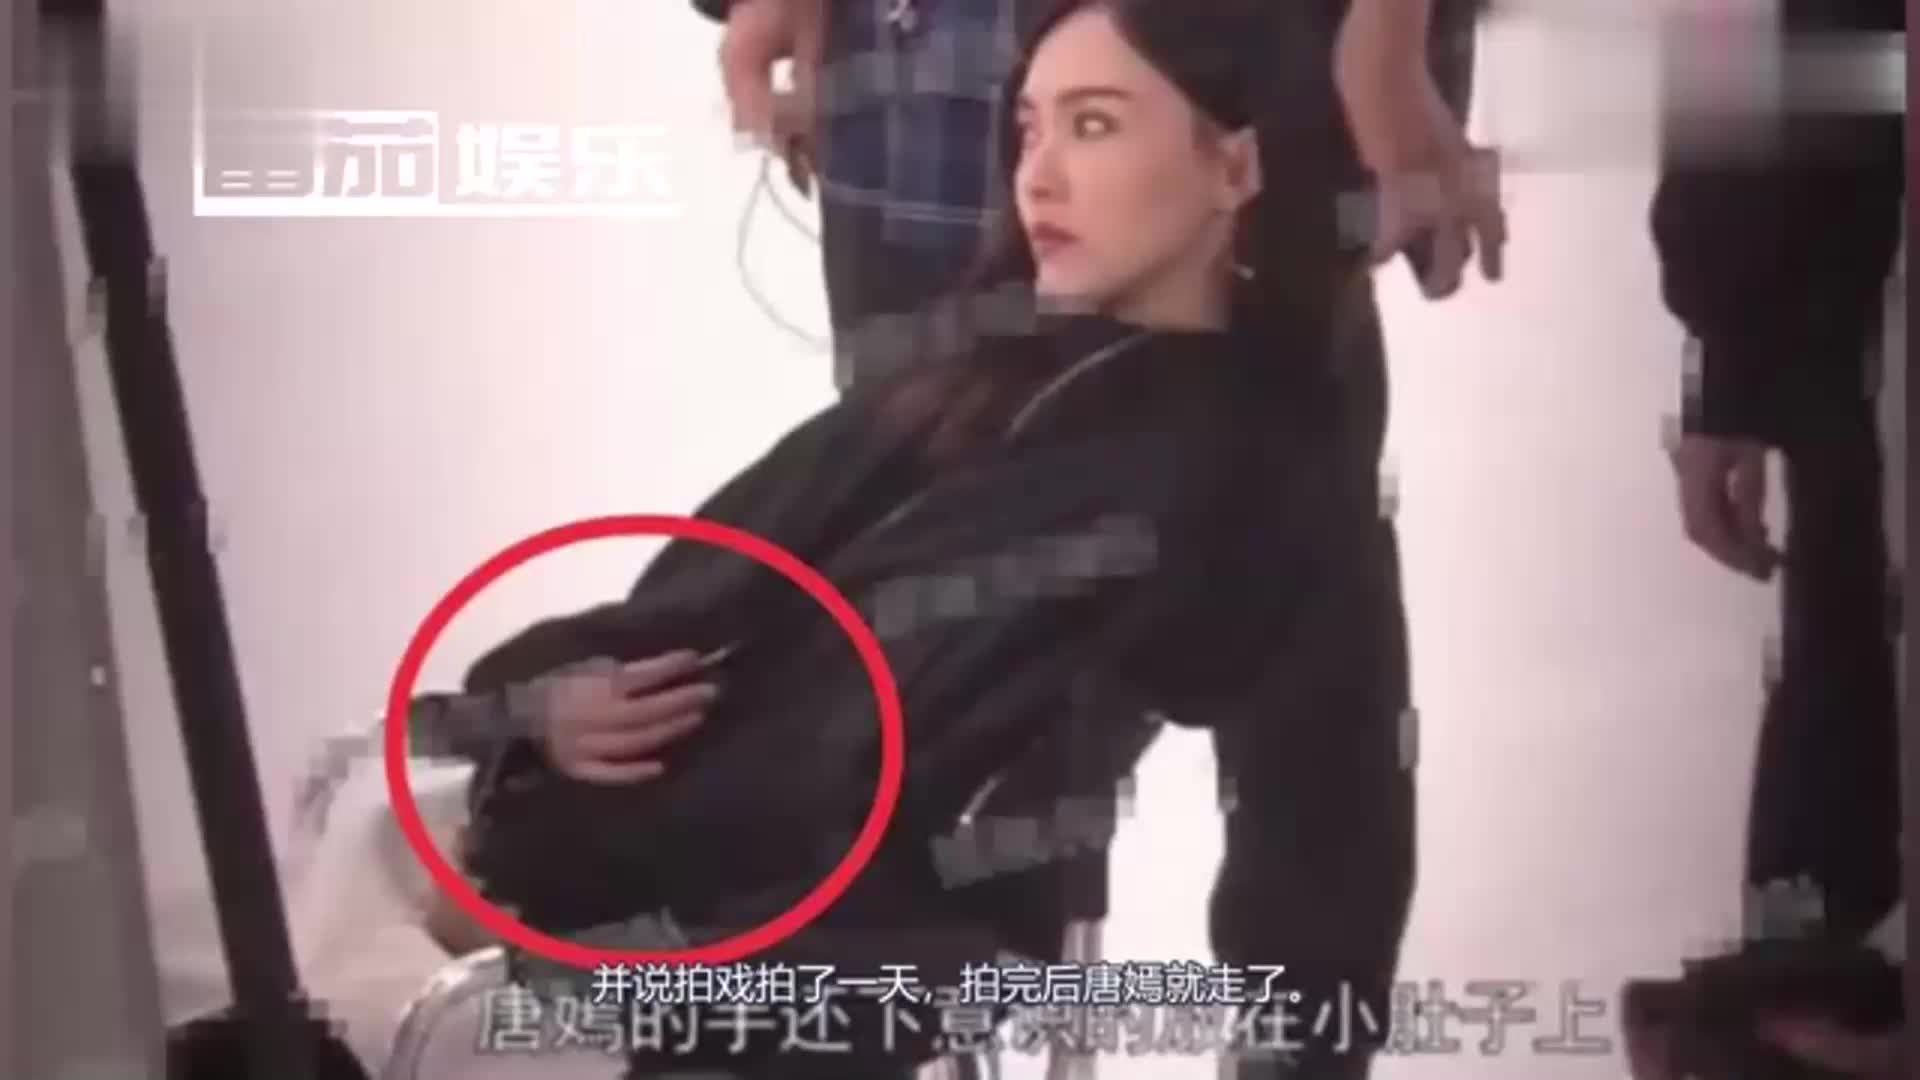 Tang Yan was photographed again and showed up after pregnancy. She kept close to the makeup artist for fear of discovering details.